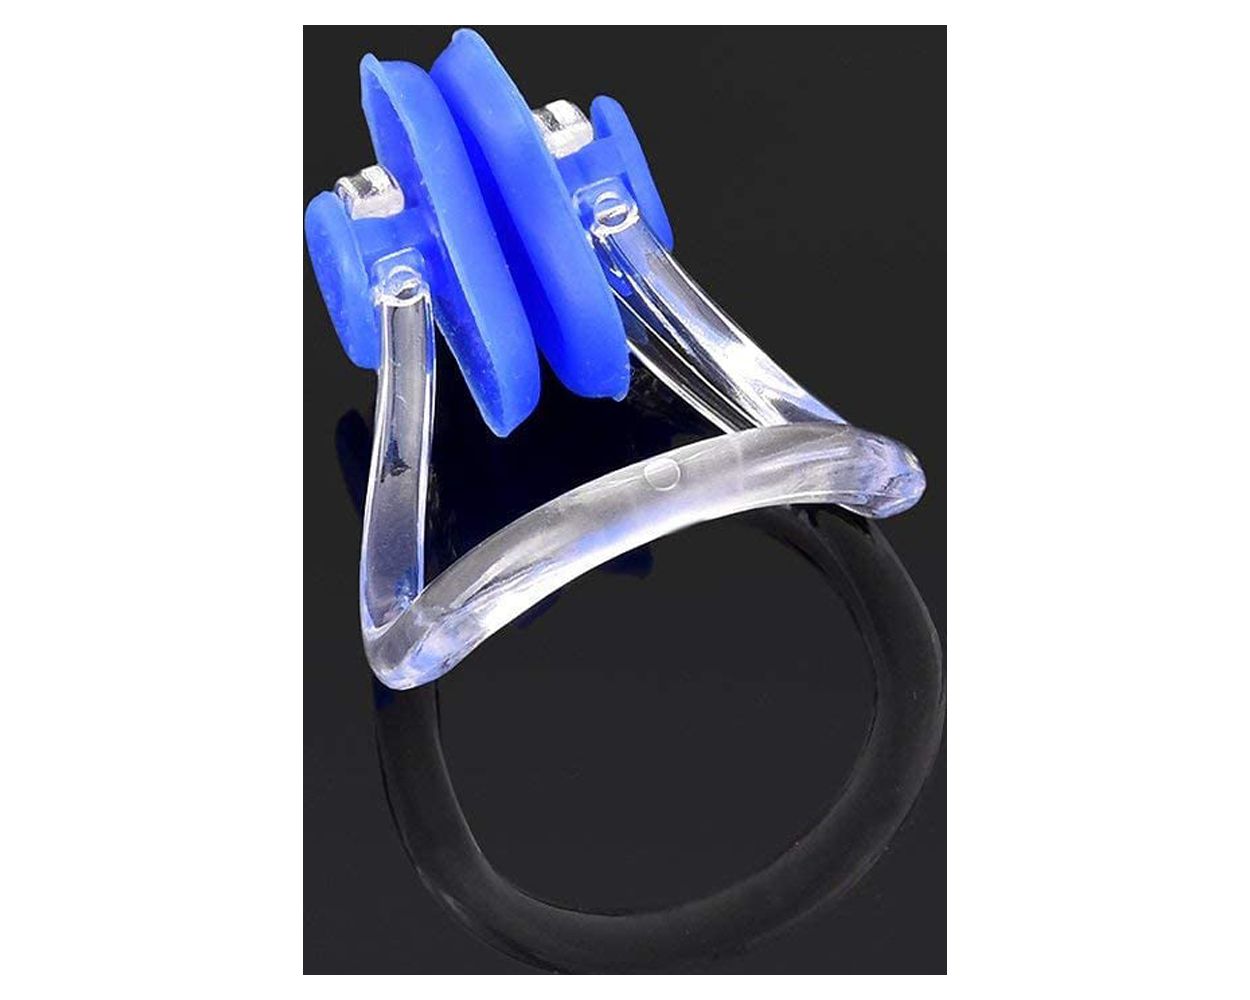 14 Pieces Nose Clip Swimming Nose Plug Swim Nose Guard for Swimming, 14 Colors - image 4 of 5